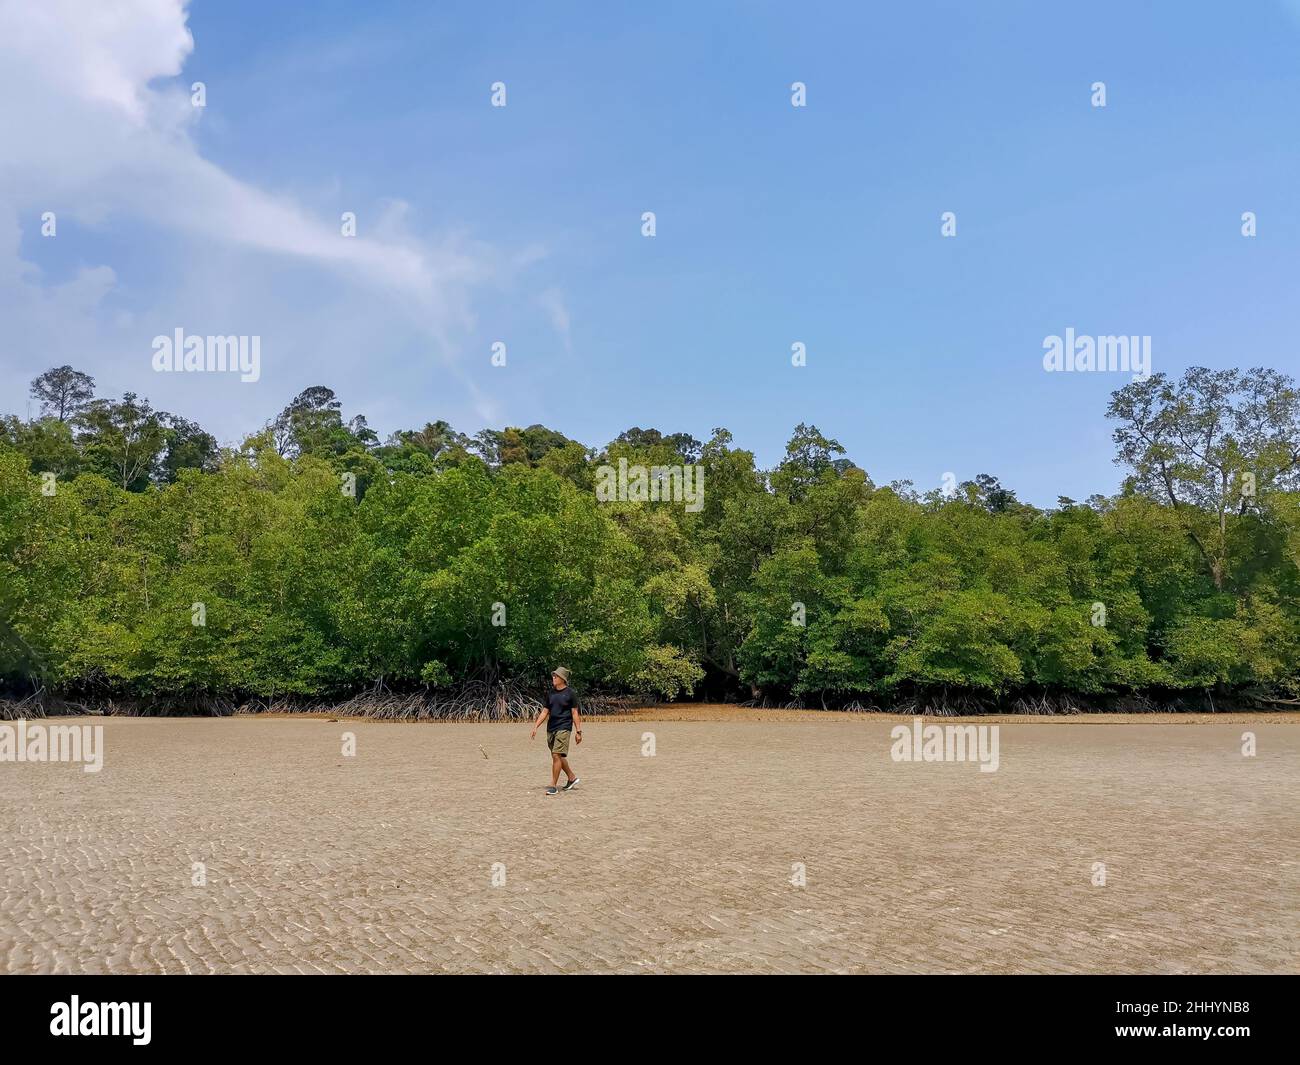 Male asian traveler walking on sandy beach with mangrove forest background during low tide period; Travel lifestyle adventure concept. Summer day natu Stock Photo